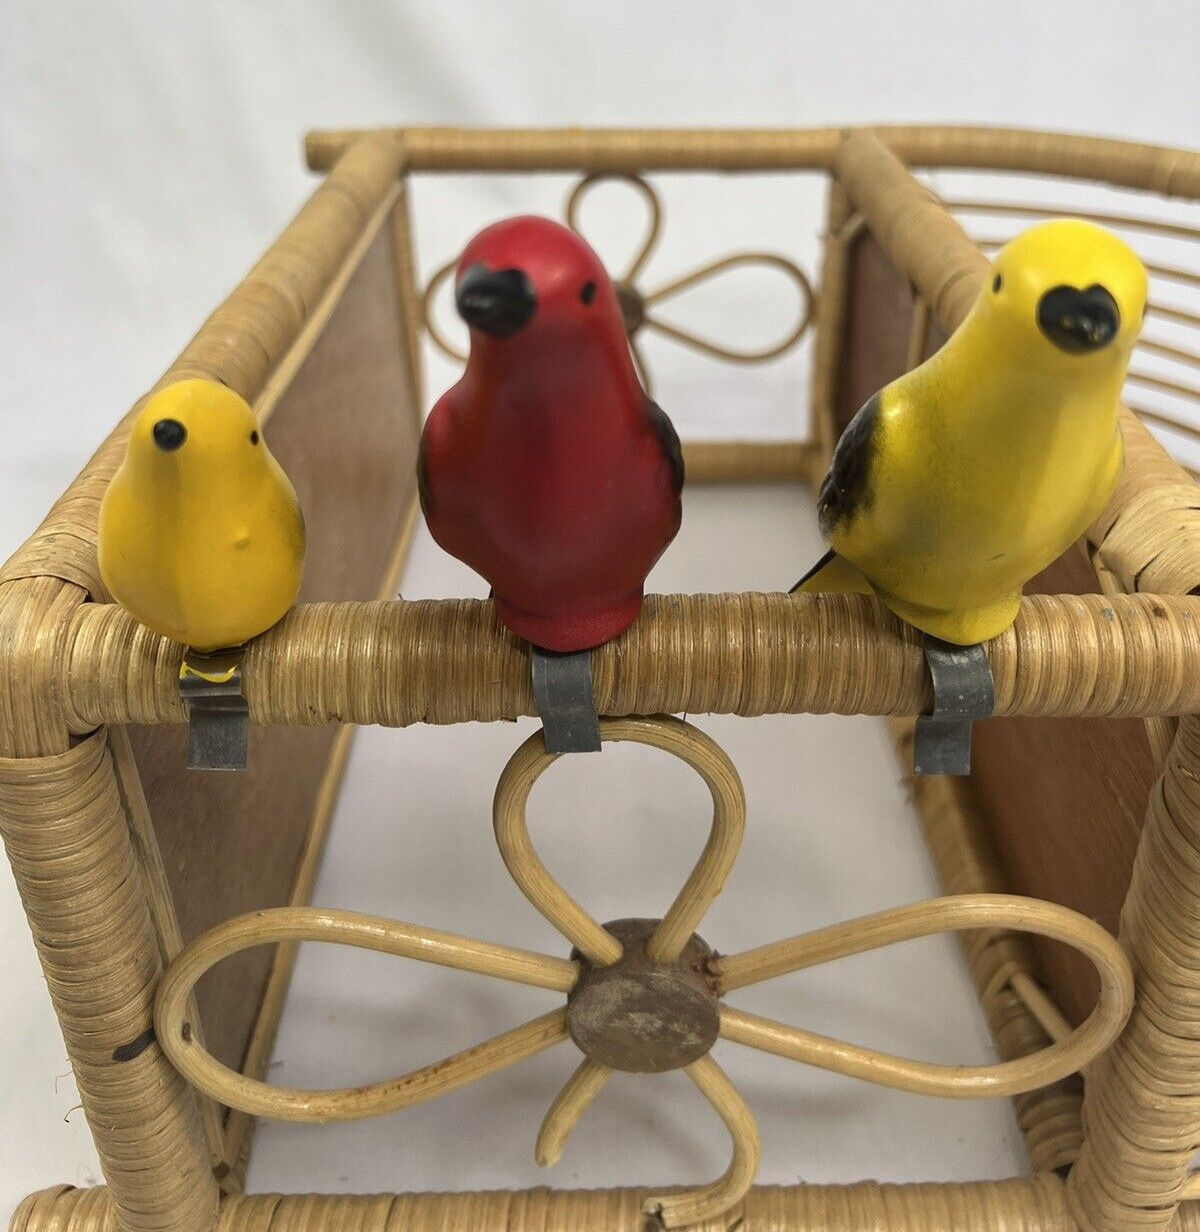 Vintage Ceramic Clip On Bird Bath Birds Lot of 3 Pottery Hand Painted Red Yellow